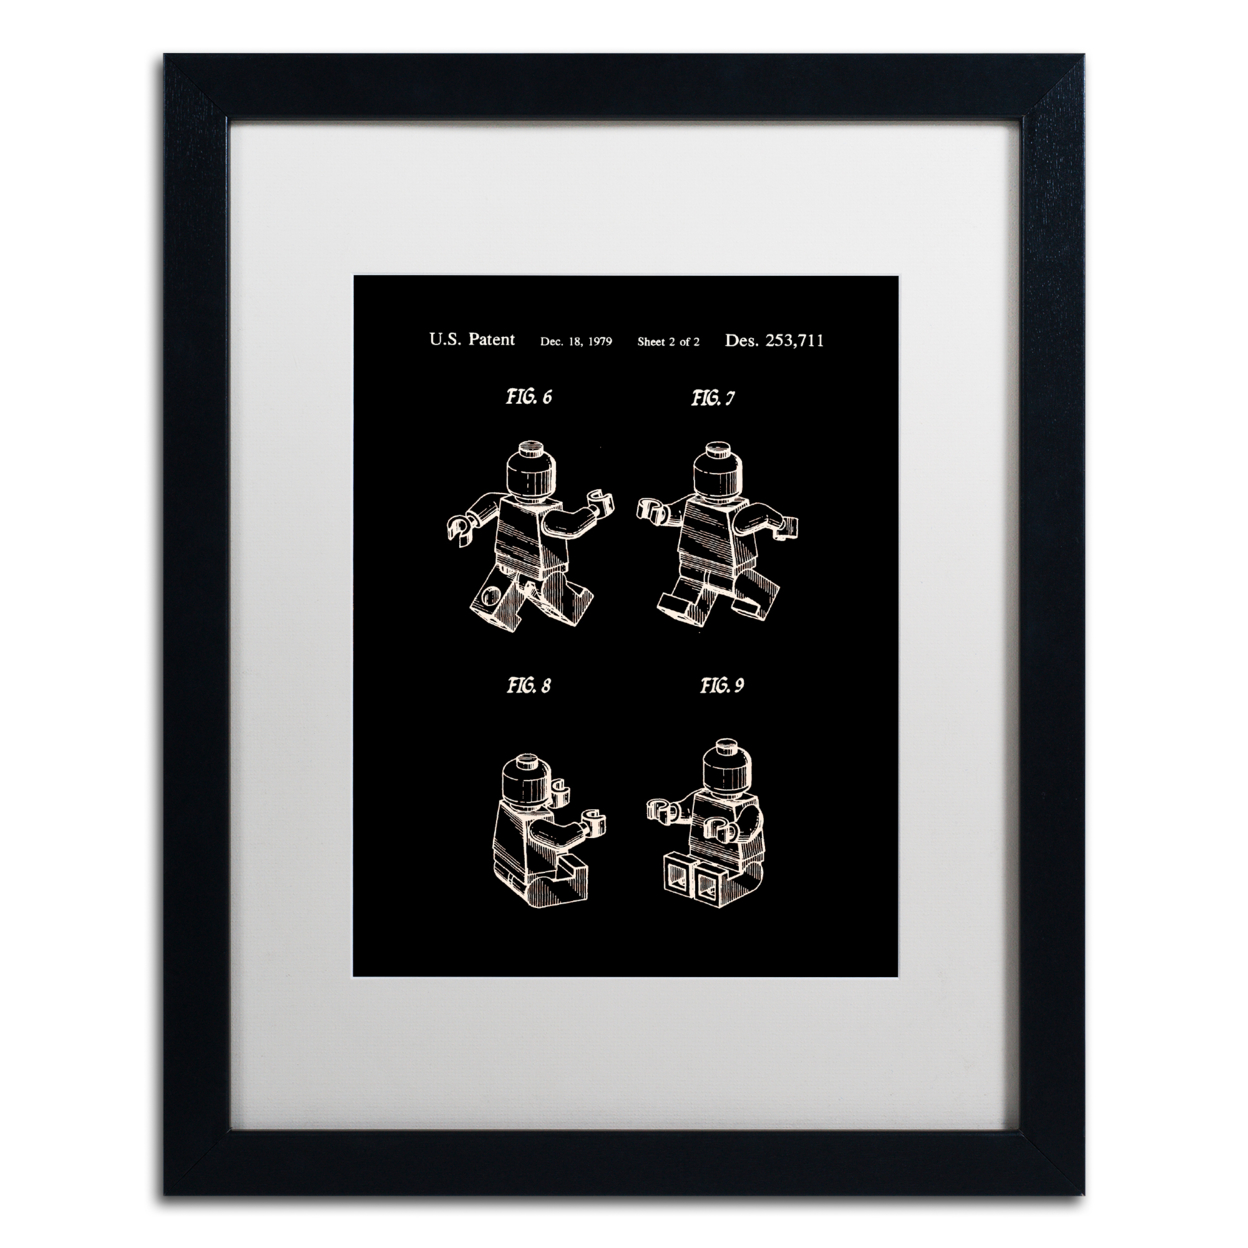 Claire Doherty 'Lego Man Patent 1979 Page 2 Black' Black Wooden Framed Art 18 X 22 Inches